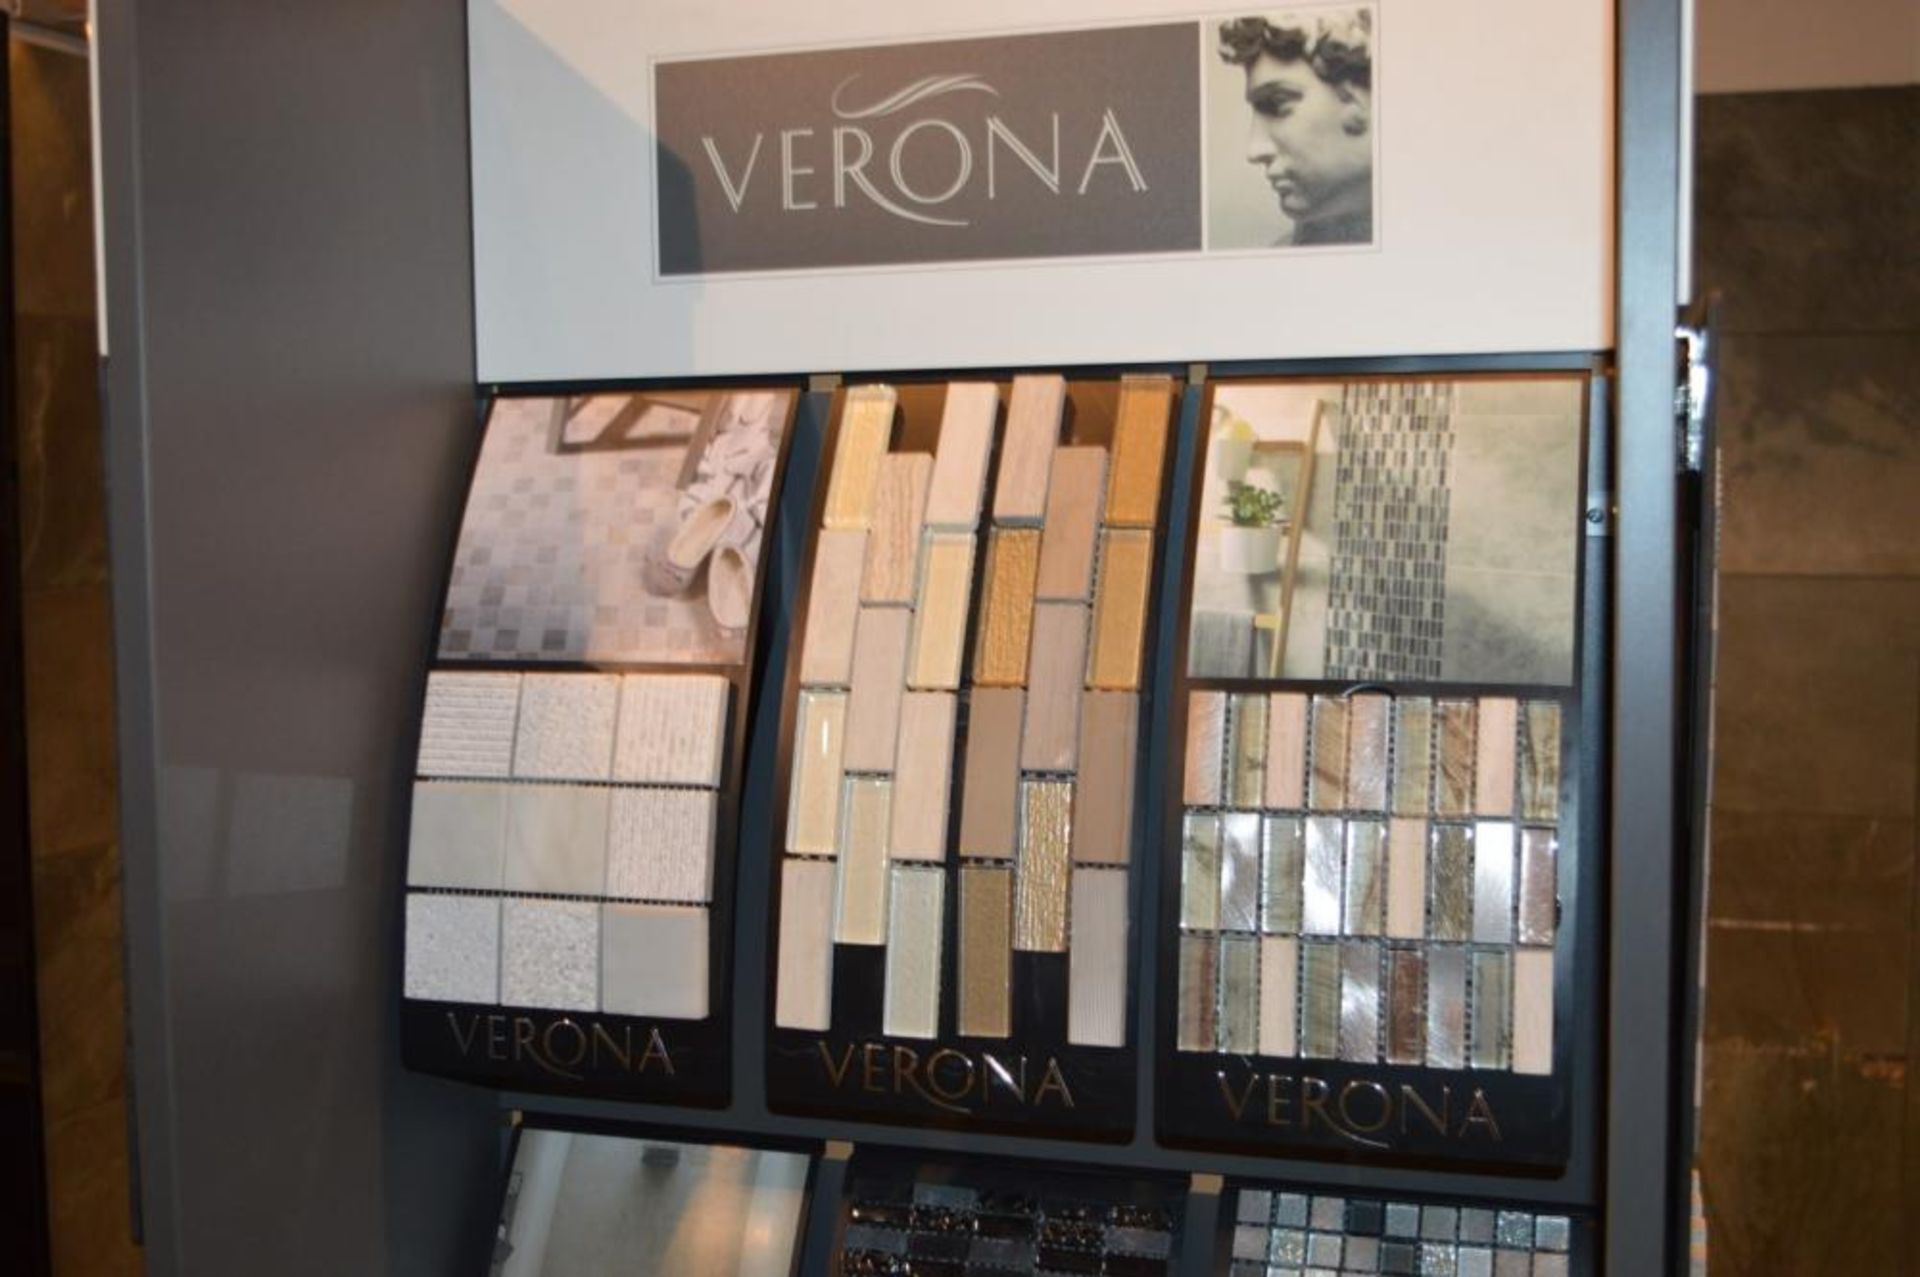 1 x Verona Tile Display Unit With Sample Stock - H184 x W84 x D65 cms - CL406 - Ref H226 - Ex - Image 8 of 11